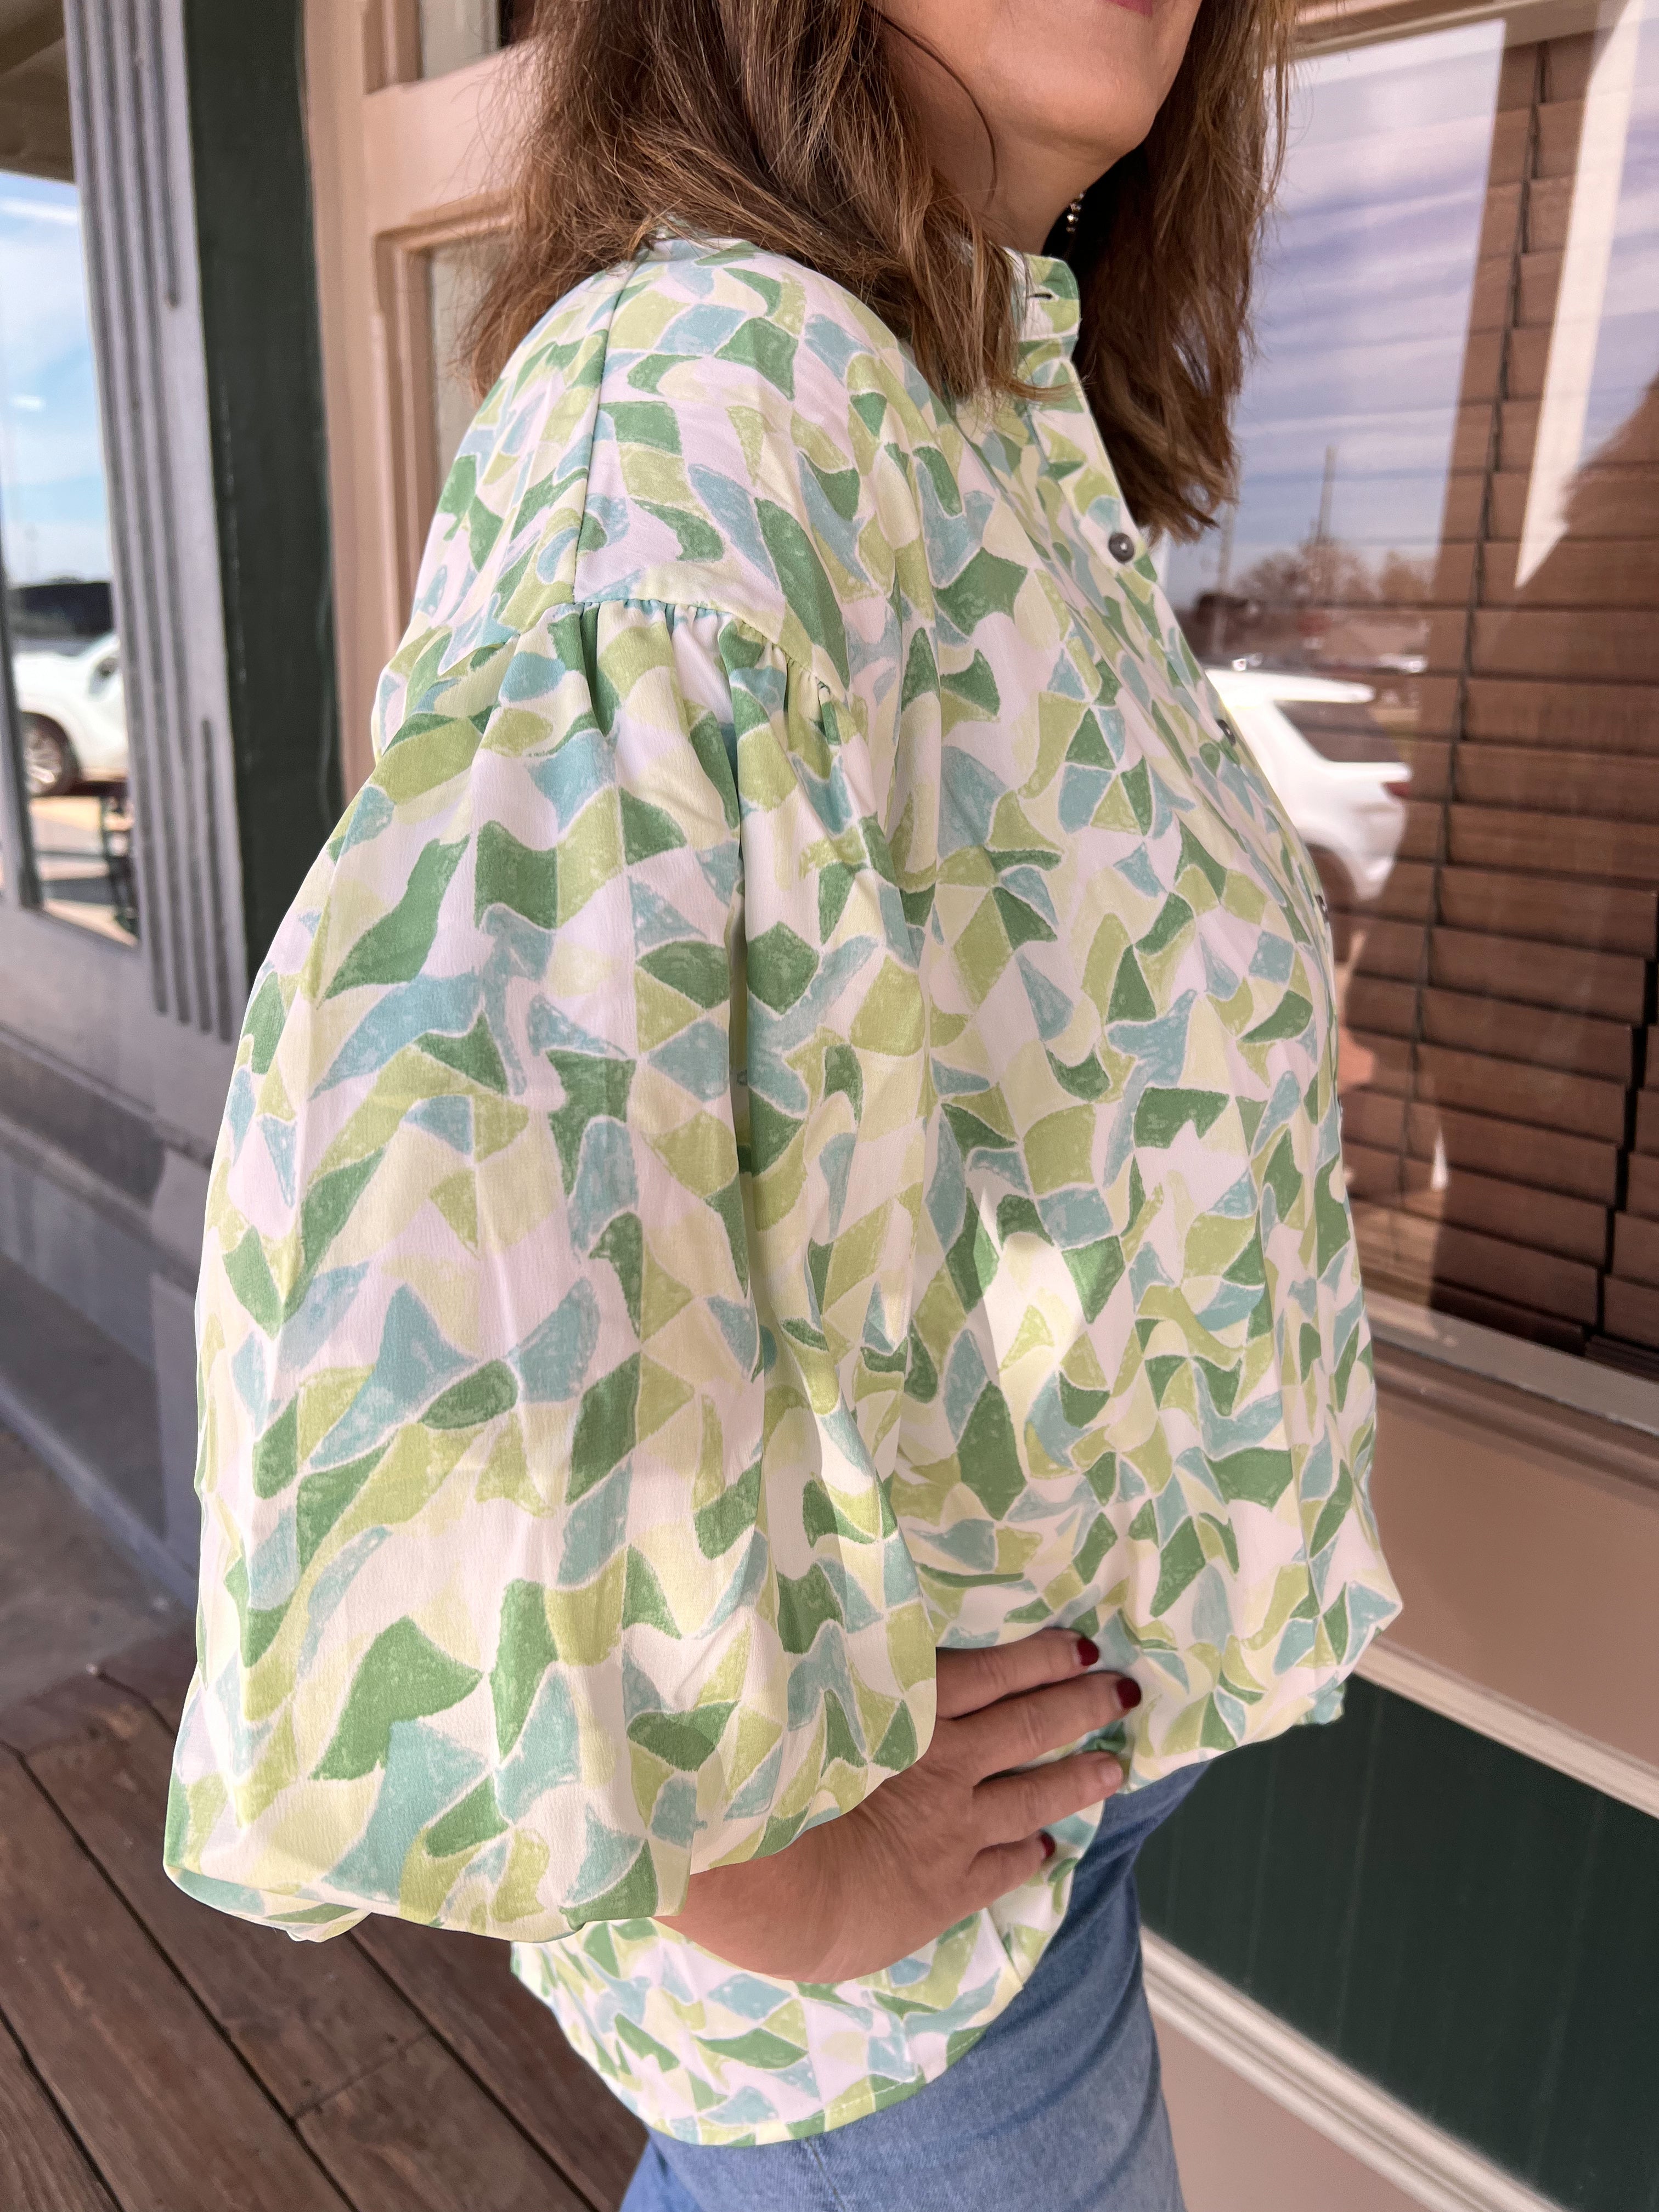 Green Patterned Blouse